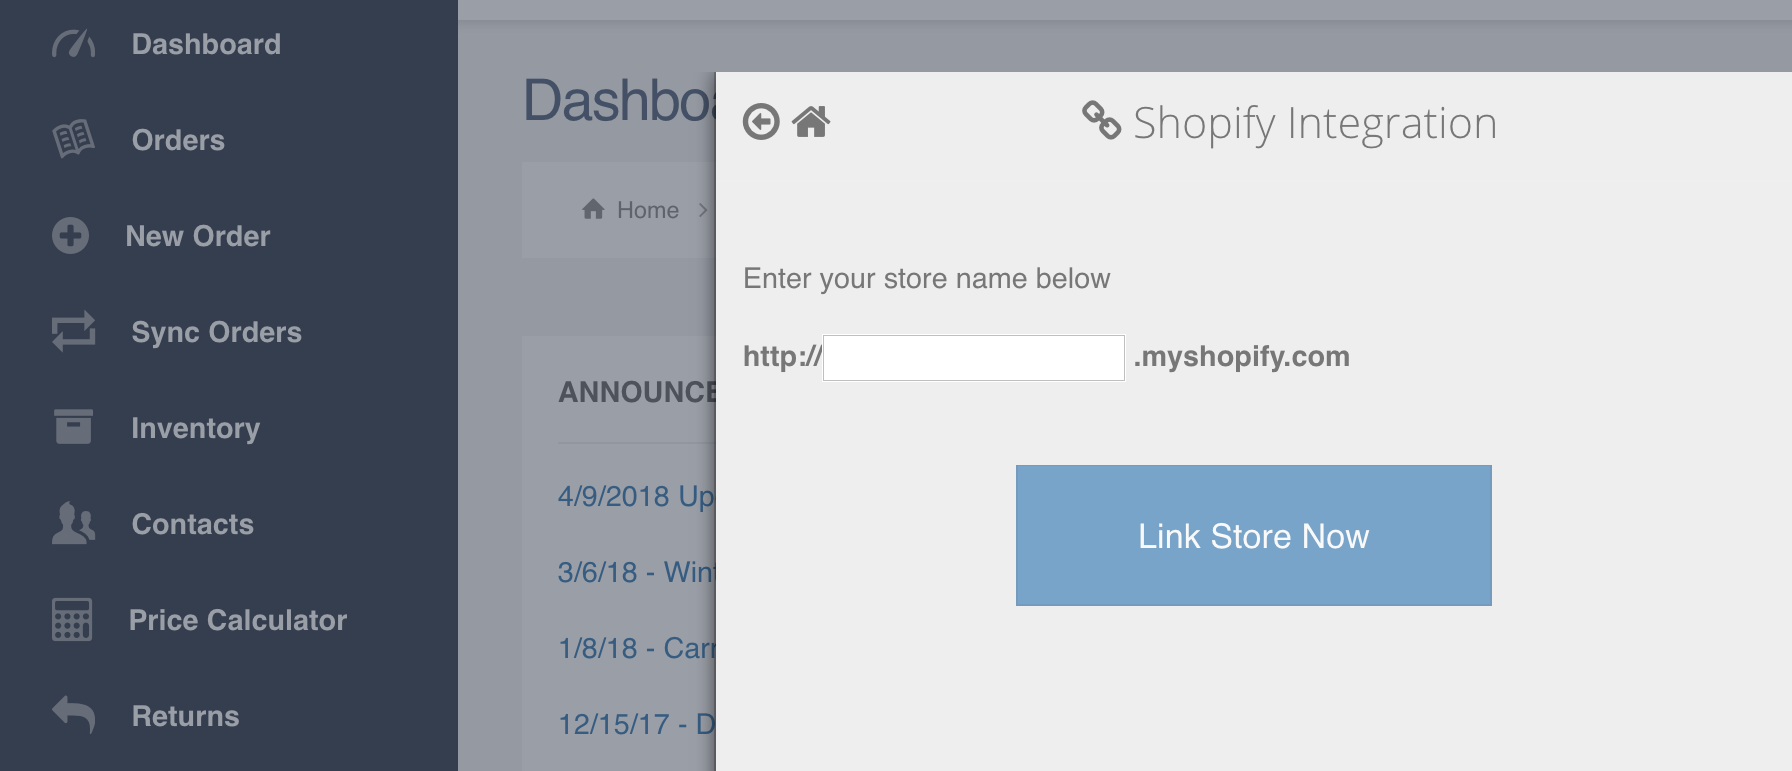 shopify integration connect to shipbob fulfilment 3pl